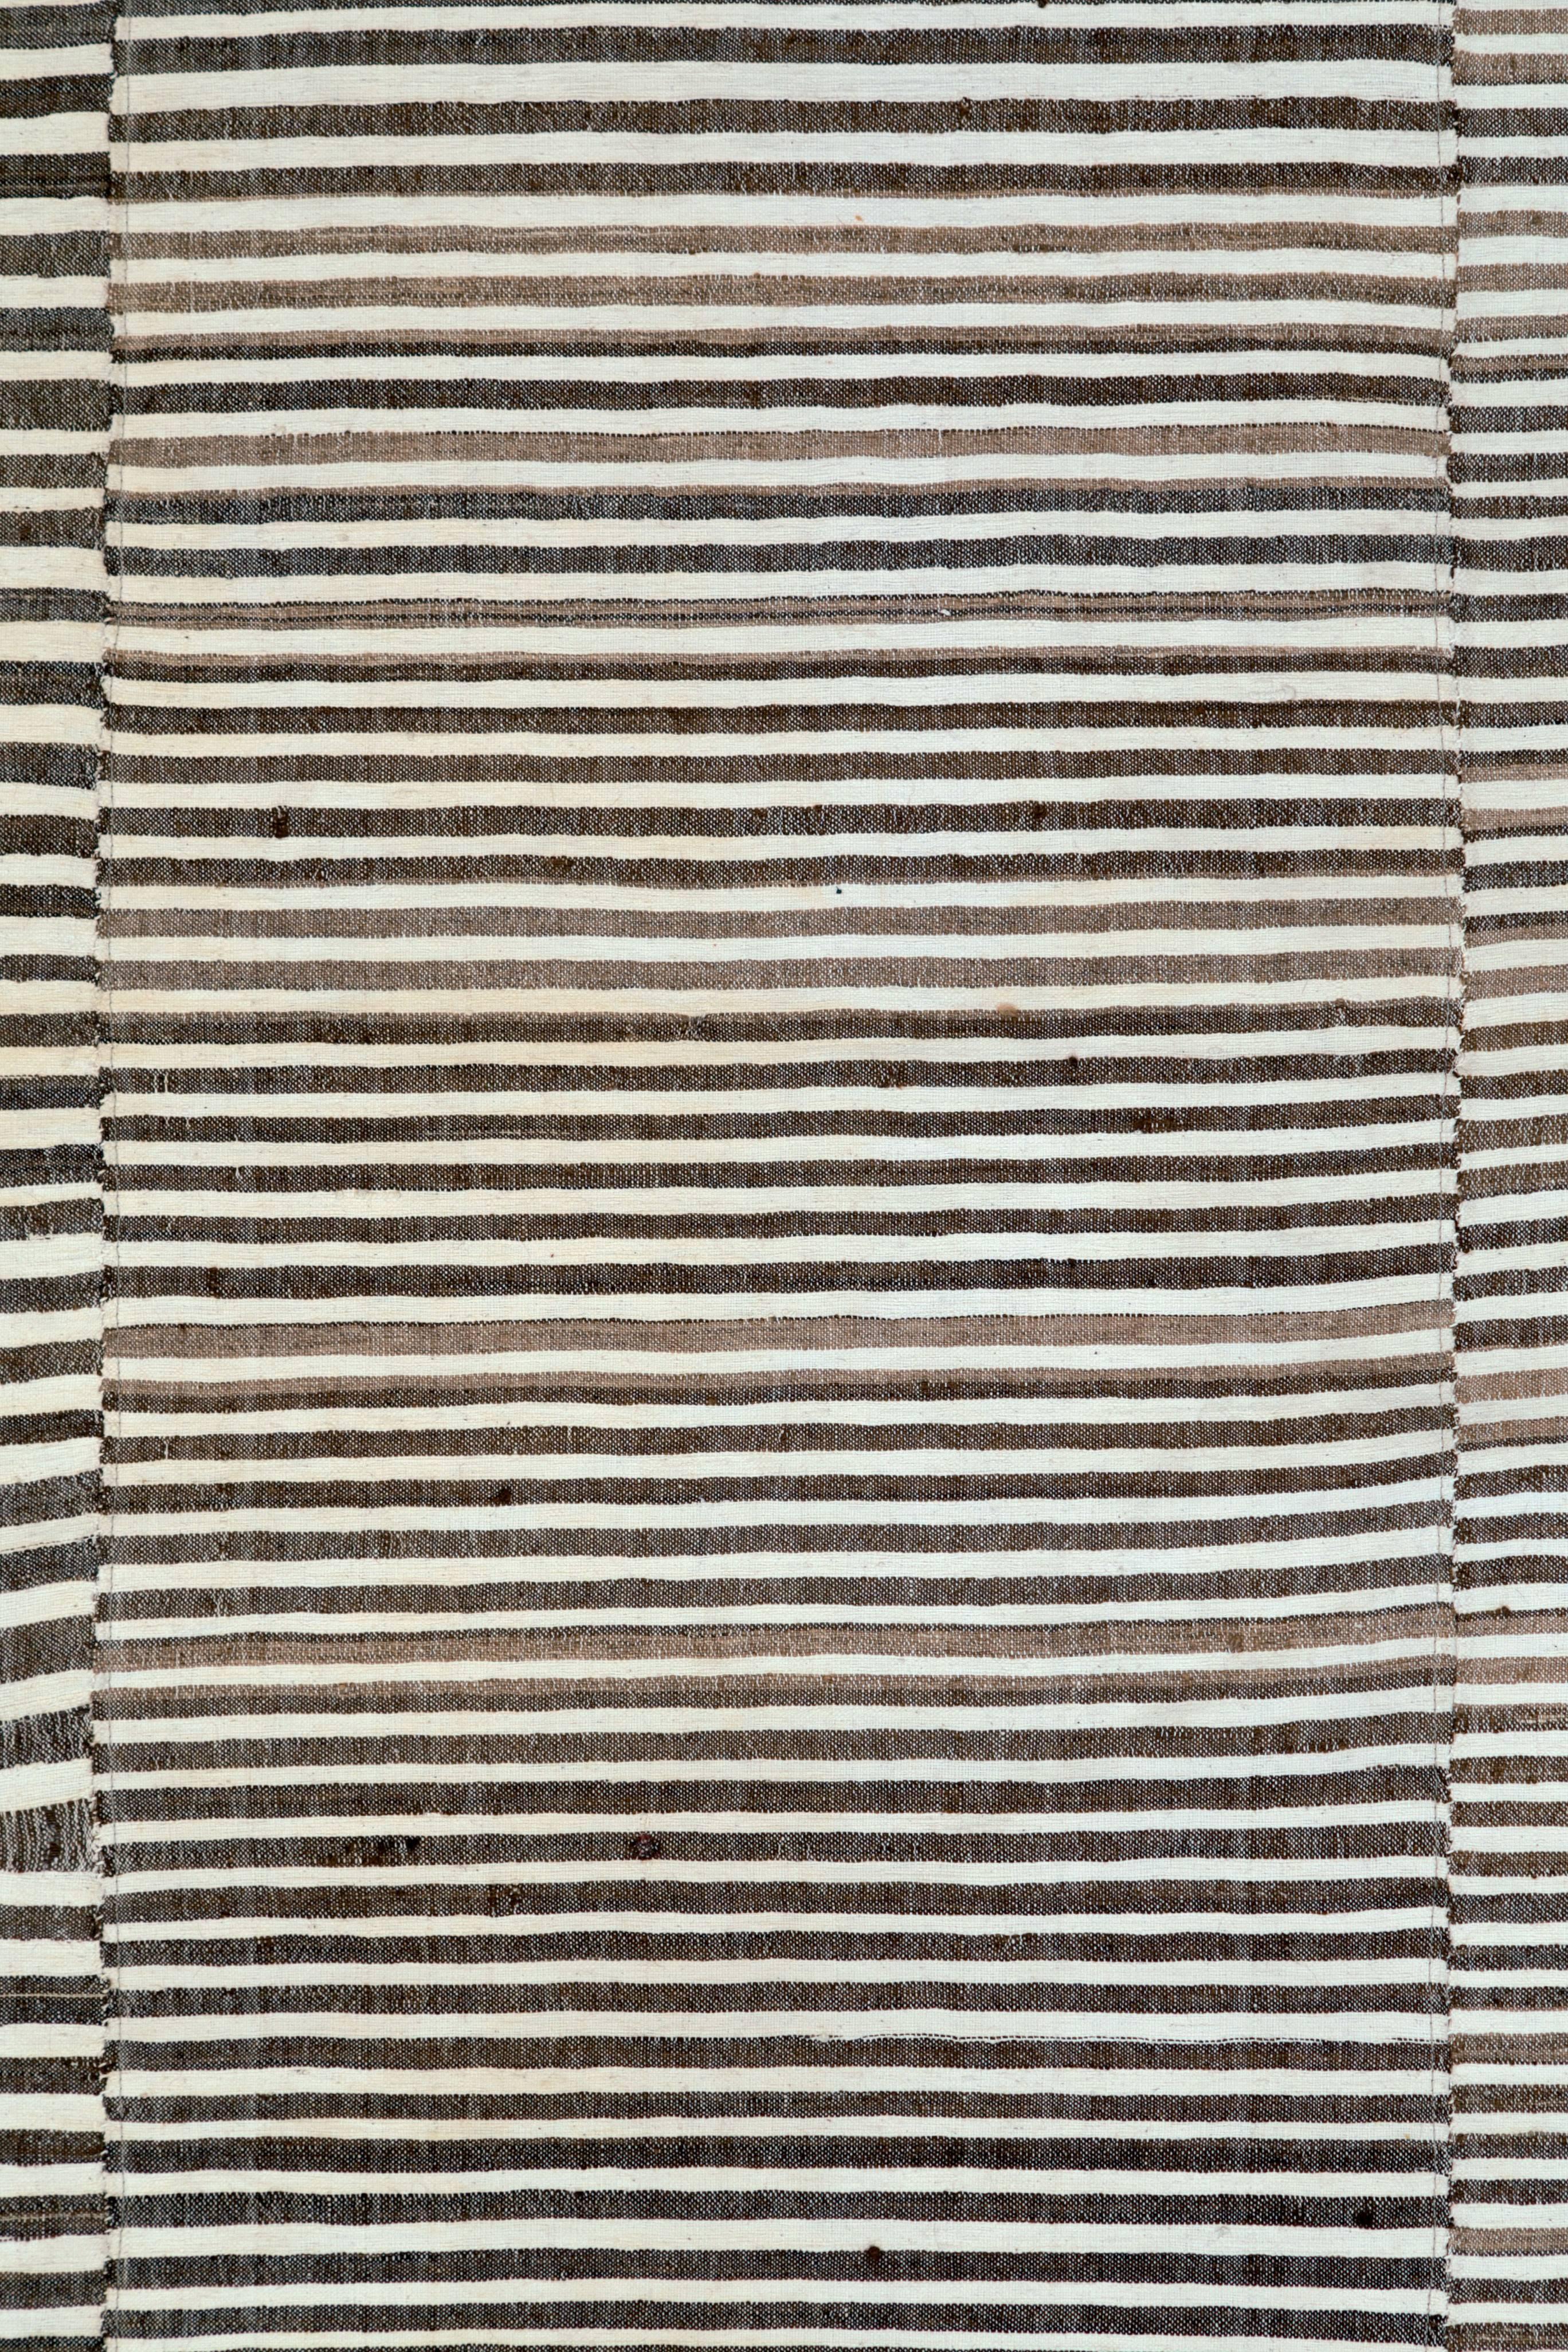 A vintage Turkish flat-woven Kilim rug from the late 20th century.